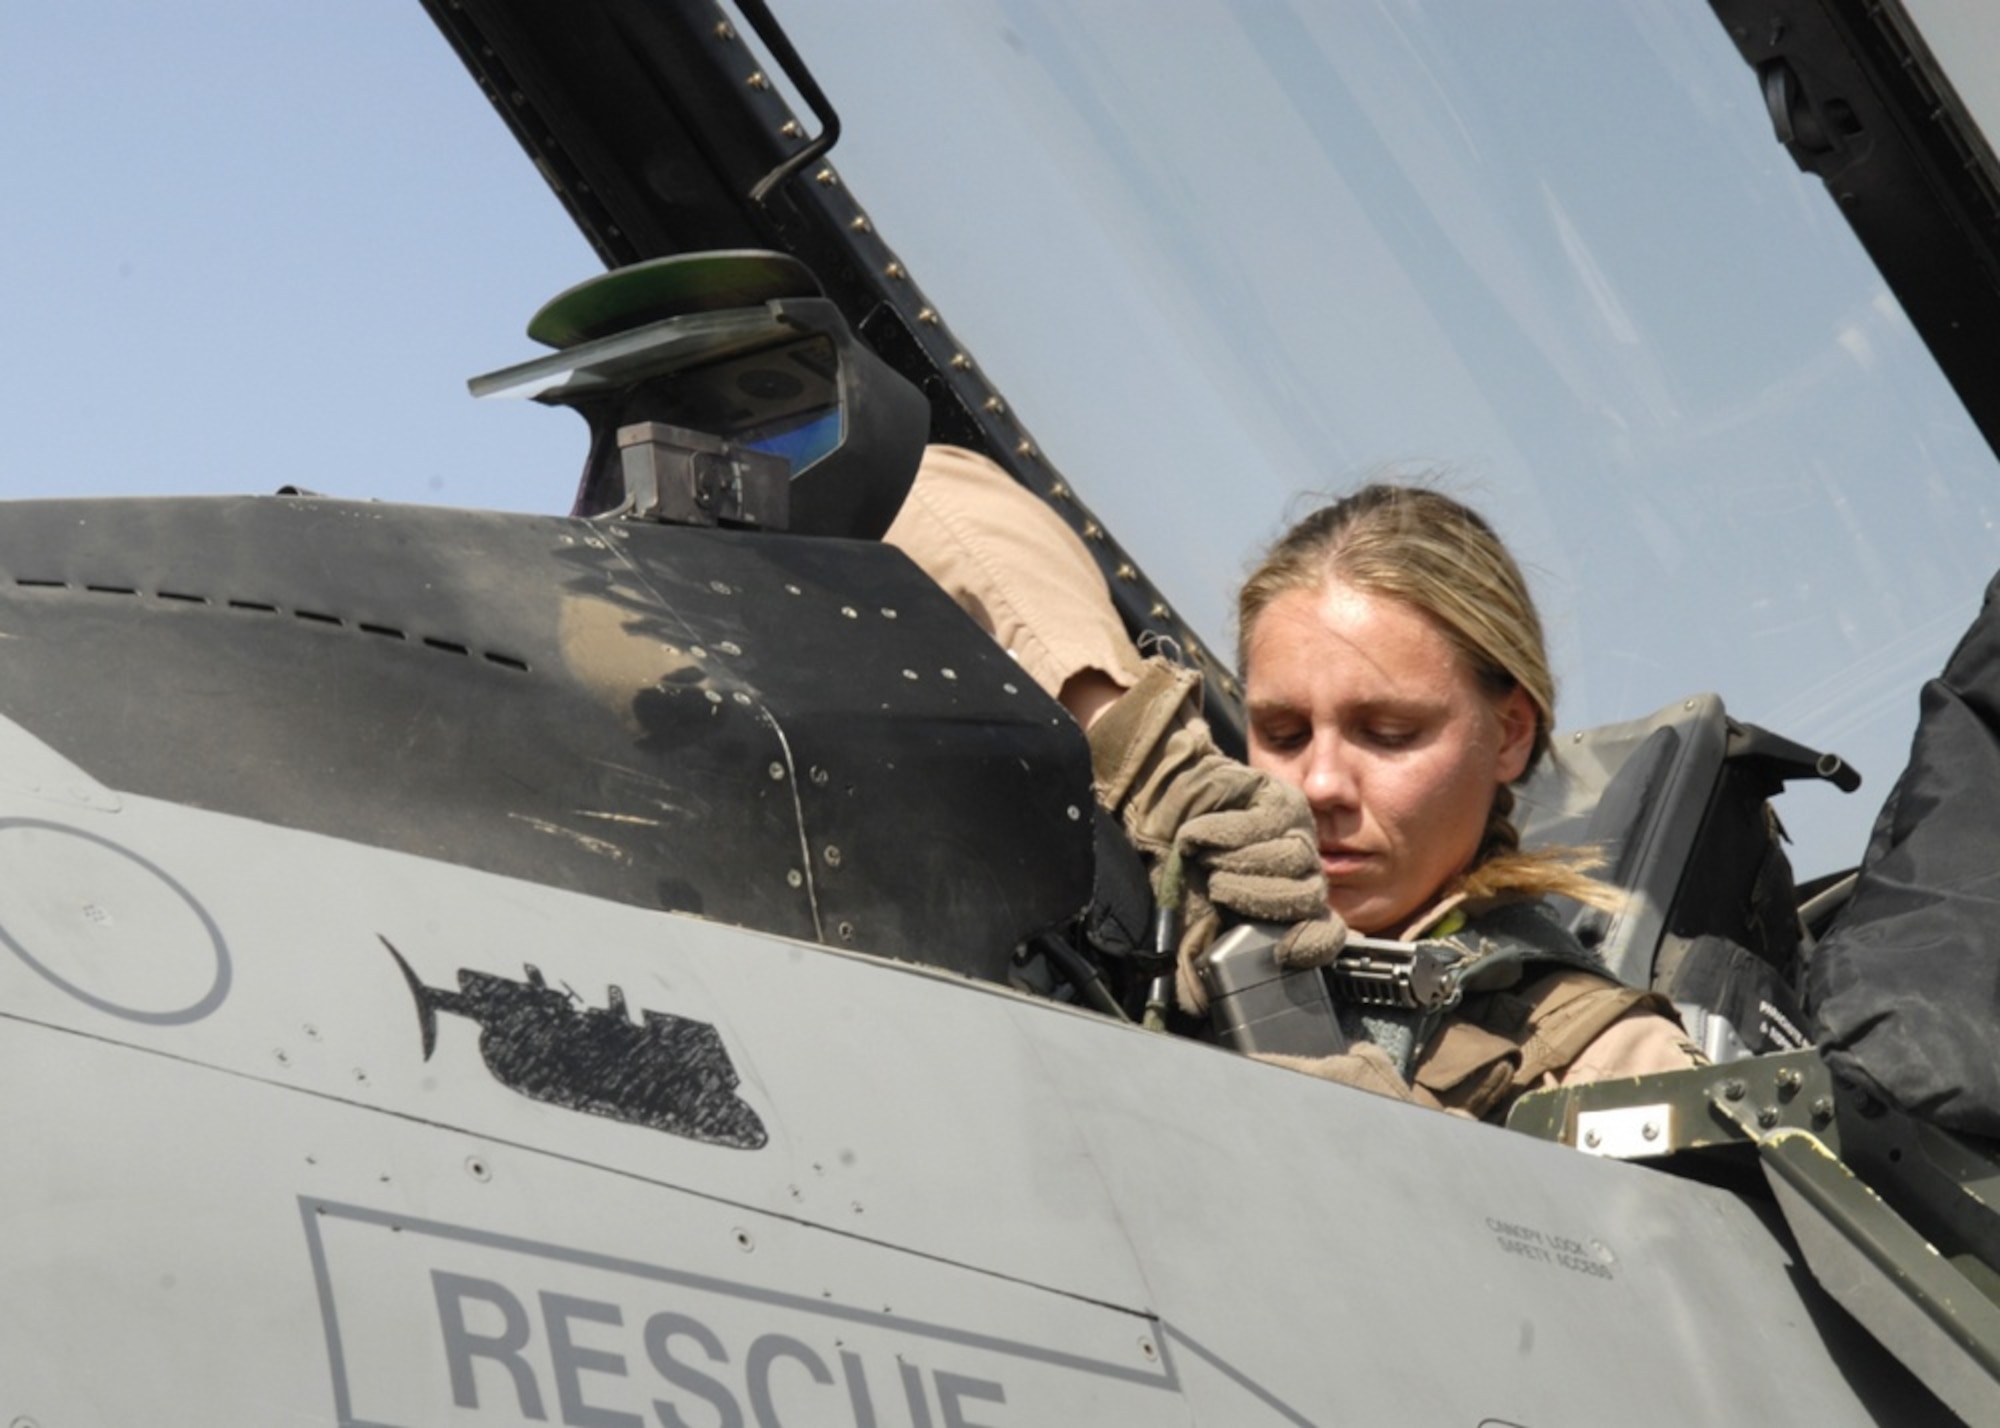 U.S. Air Force pilot Capt. Caroline Jensen, from the 4th Expeditionary Fighter Squadron, connects the communications receiver to her helmet ensuring she is in contact with personnel on the ground prior to taking off in an F-16 Fighting Falcon from Balad Air Base. Jensen is deployed from Hill Air Force Base, Utah. (U.S. Air Force Photo/Staff Sgt. Joshua Garcia, Released)